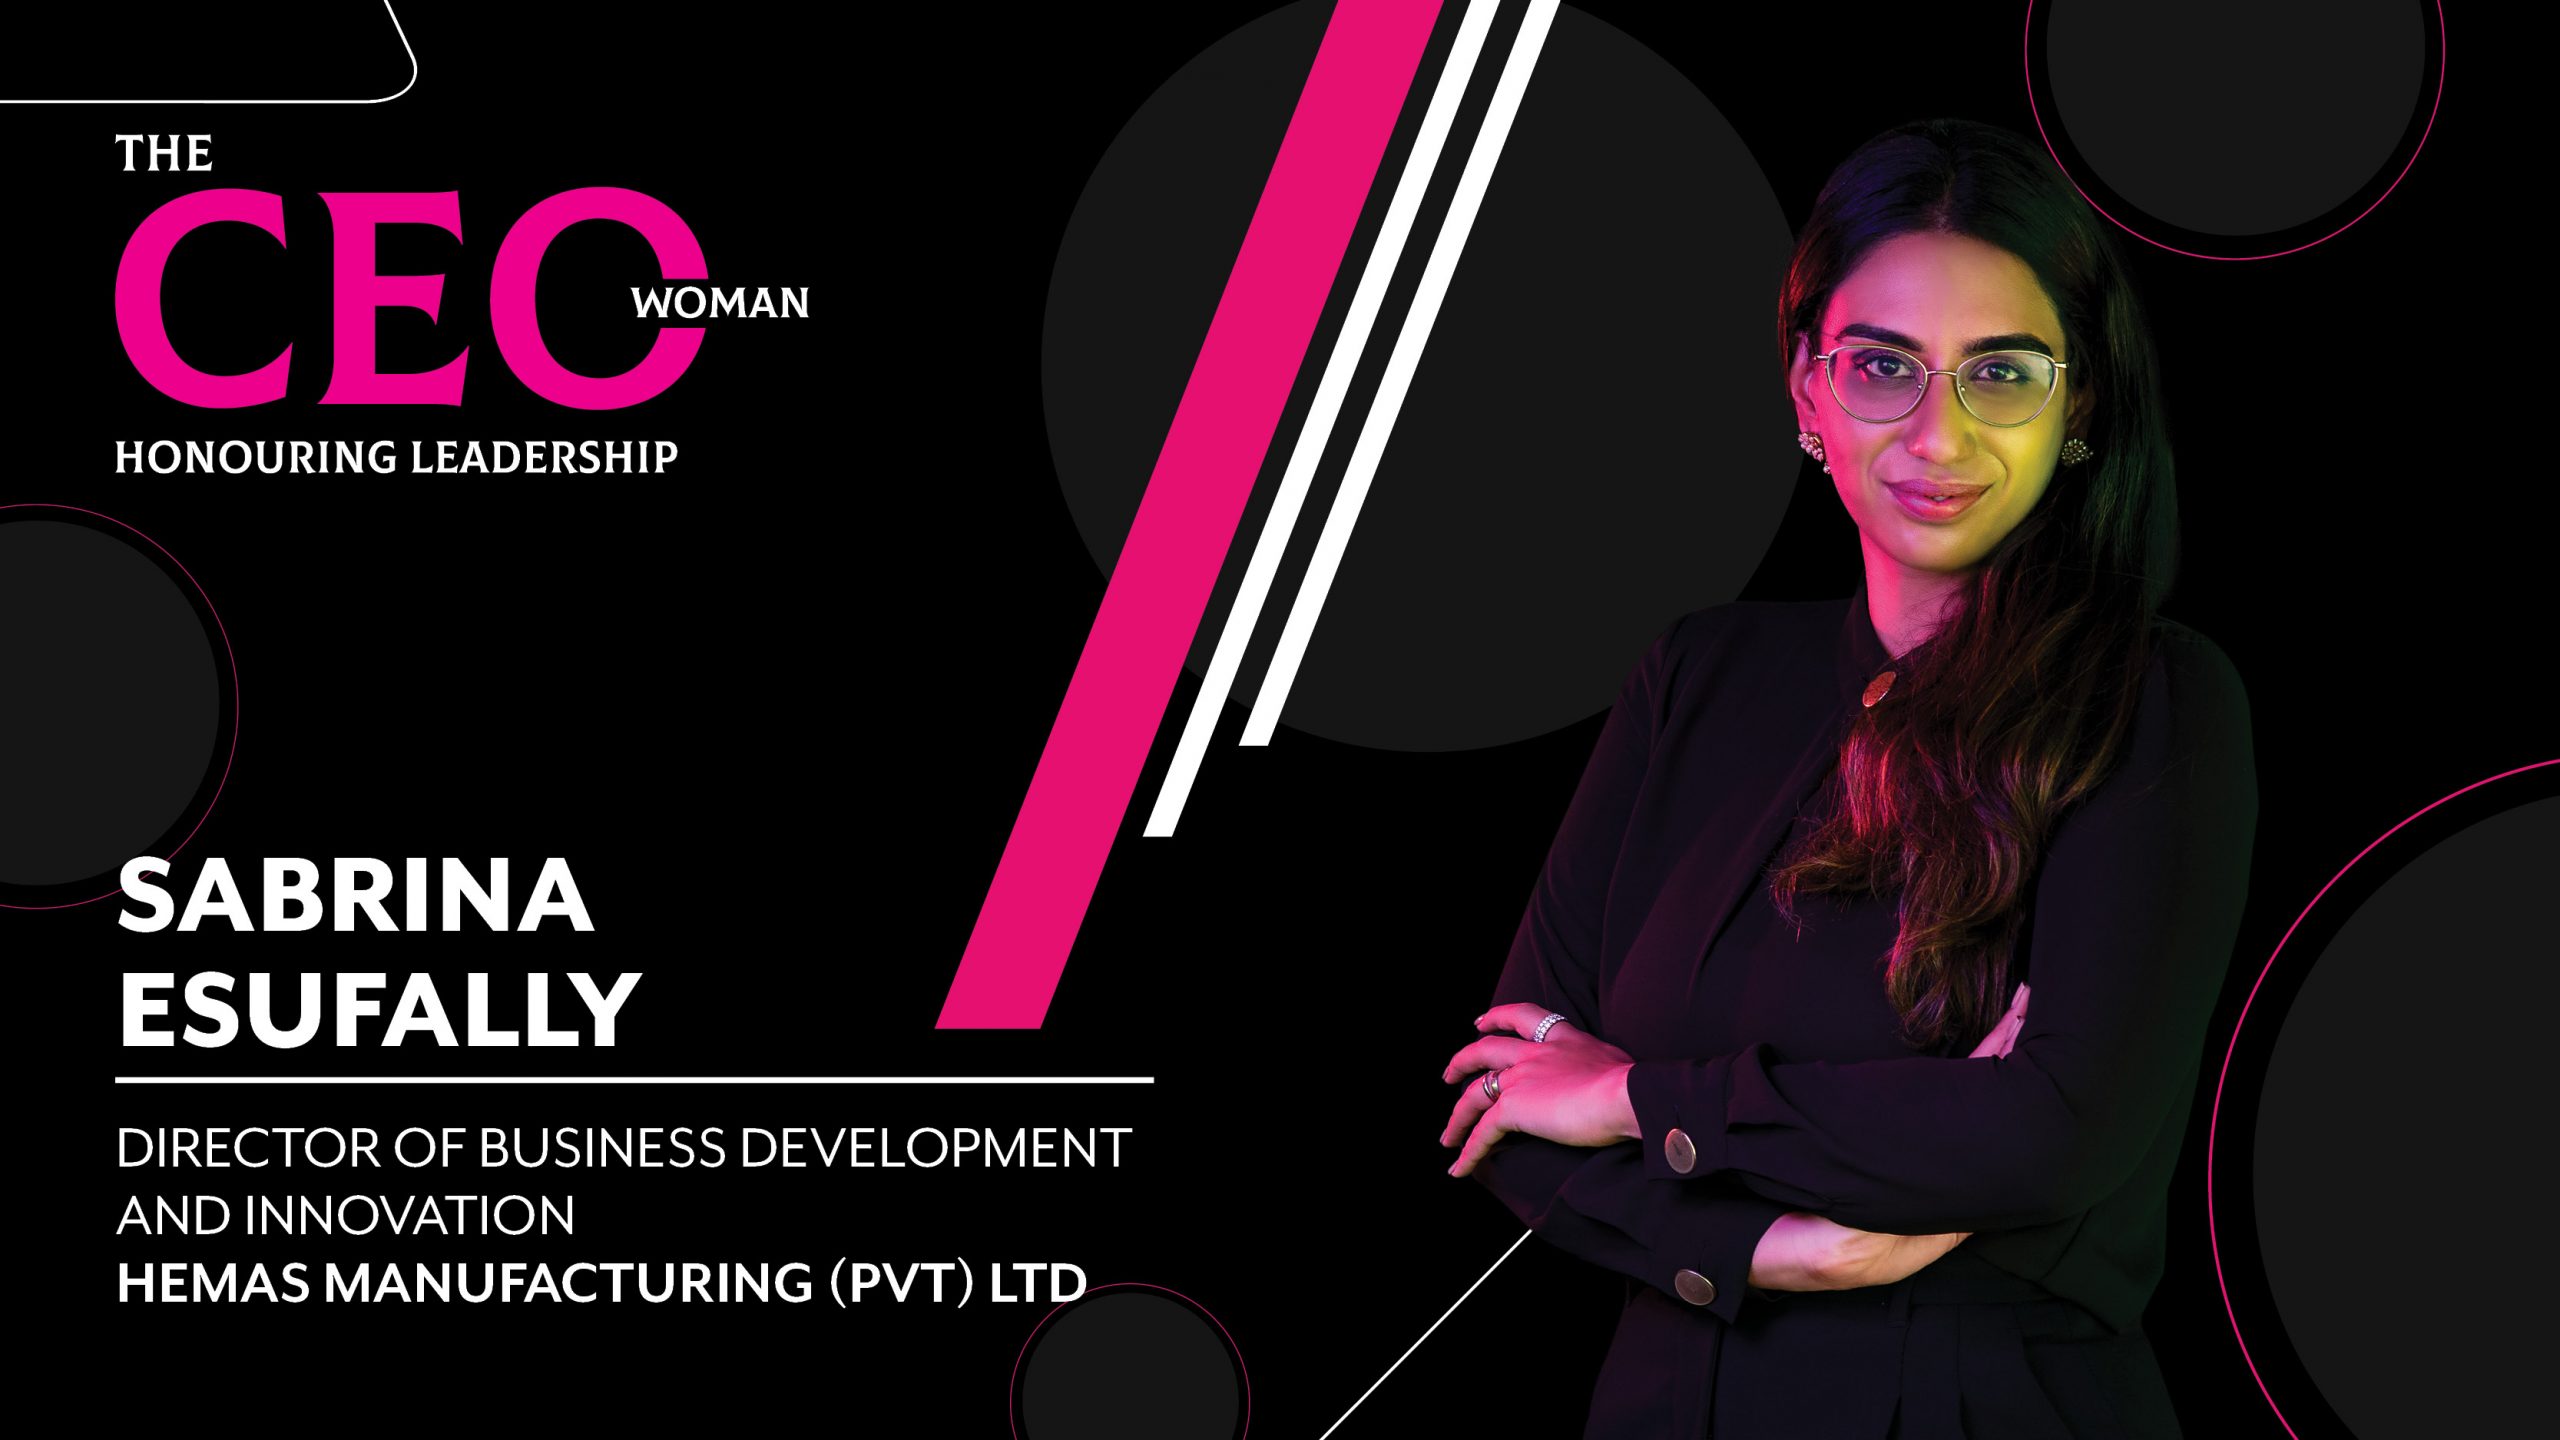 The Making of a Leader – the Director of Business Development and Innovation at Hemas Manufacturing (PVT) Ltd, Sabrina Esufally